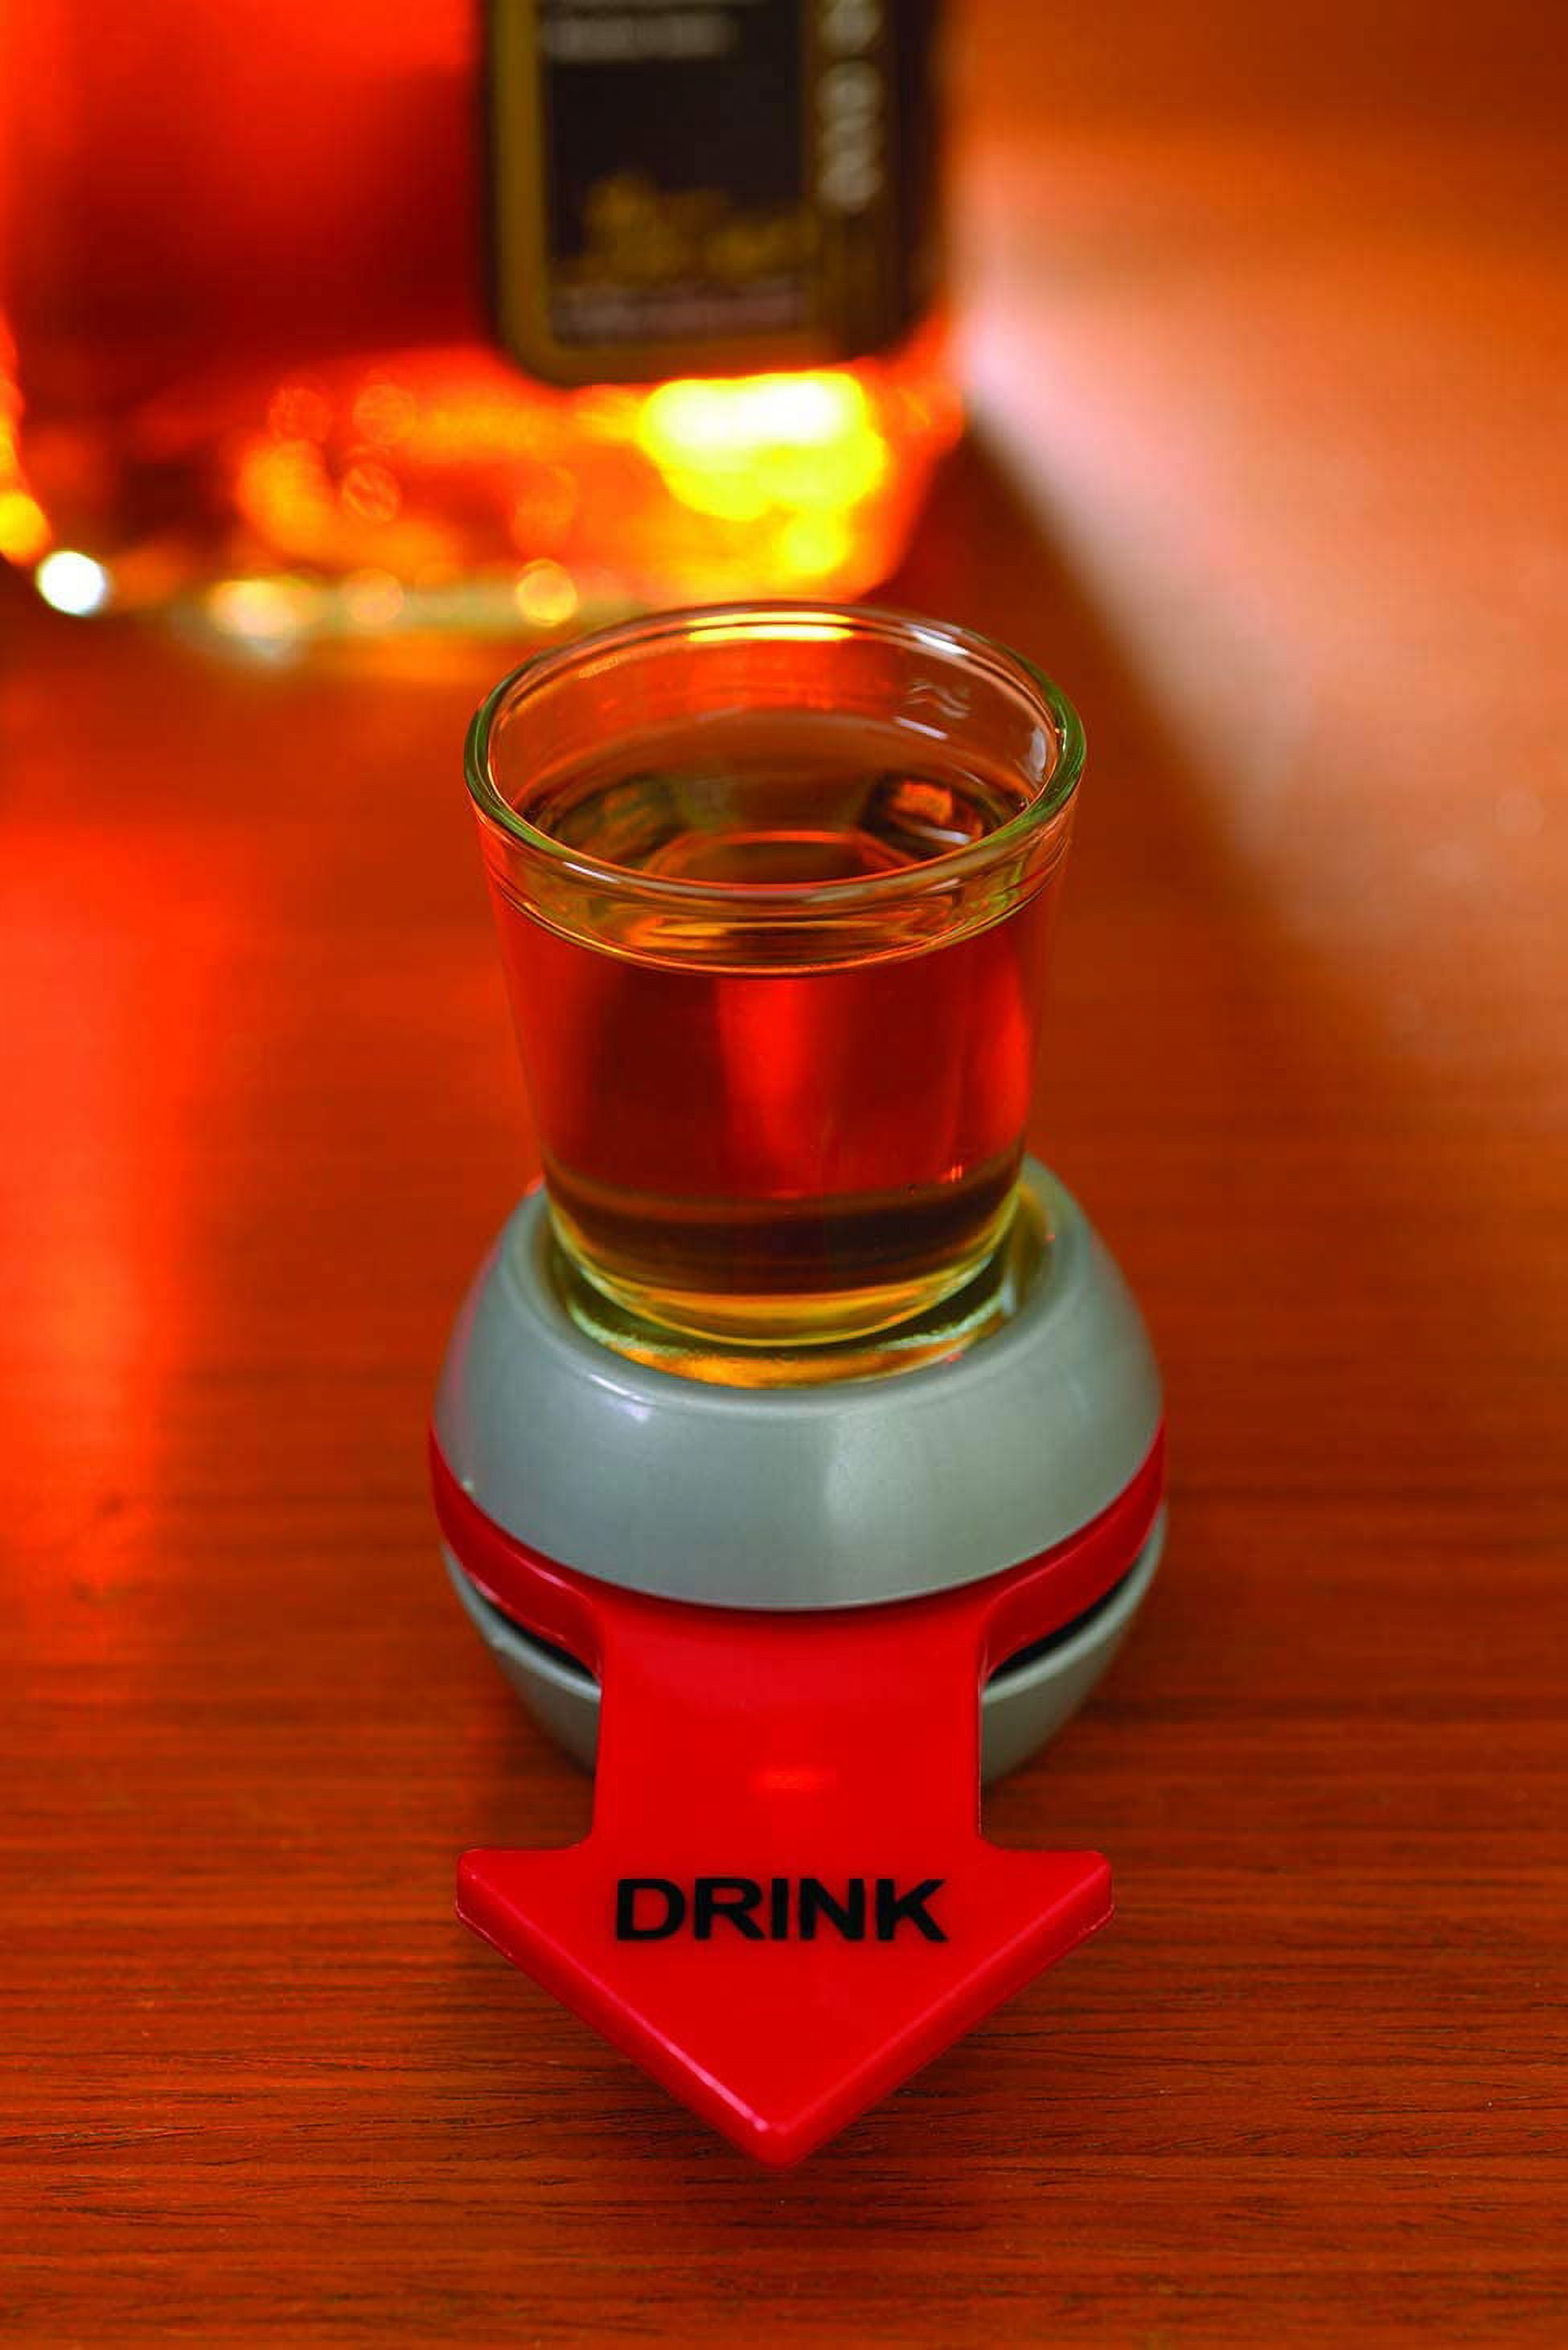 CRETVIS Shot Spinner Spin The Shot Fun Drinking Game Spin Shot Game Party  Games for Adults Includes 1 oz Shot Glass